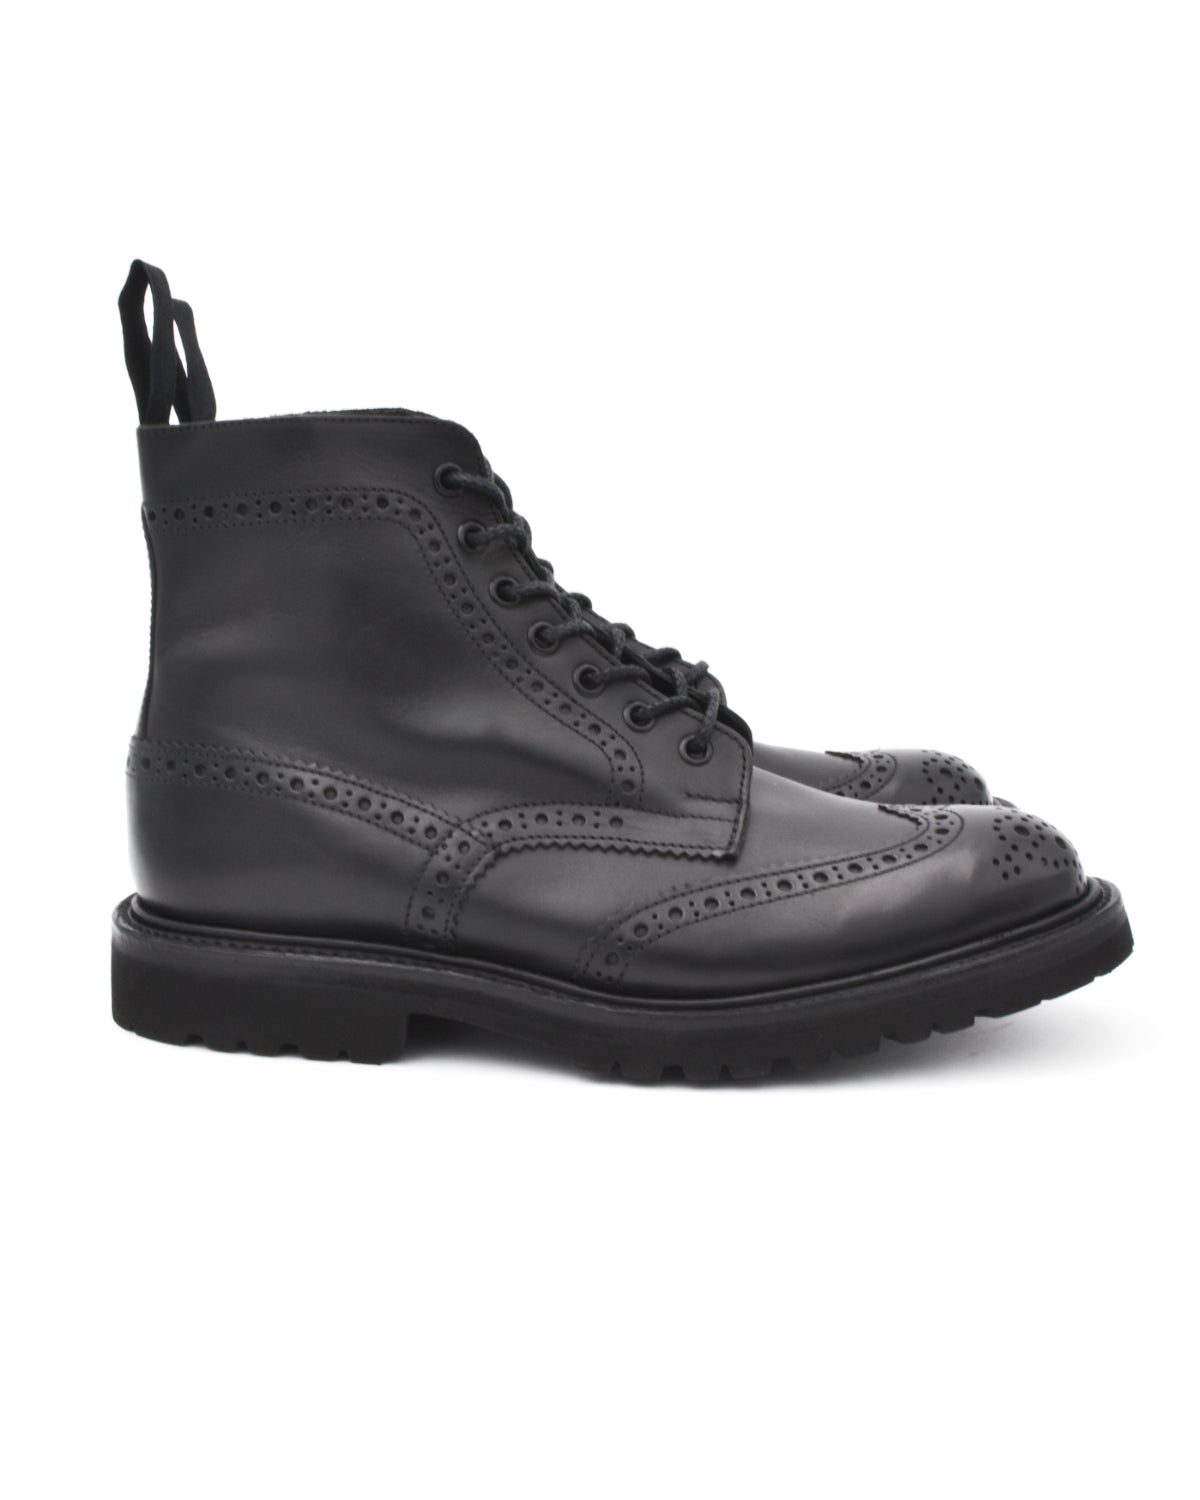 Trickers Black Stow Lace-Up Boot on Vi-Lite Vibram Sole – Halo Shoes